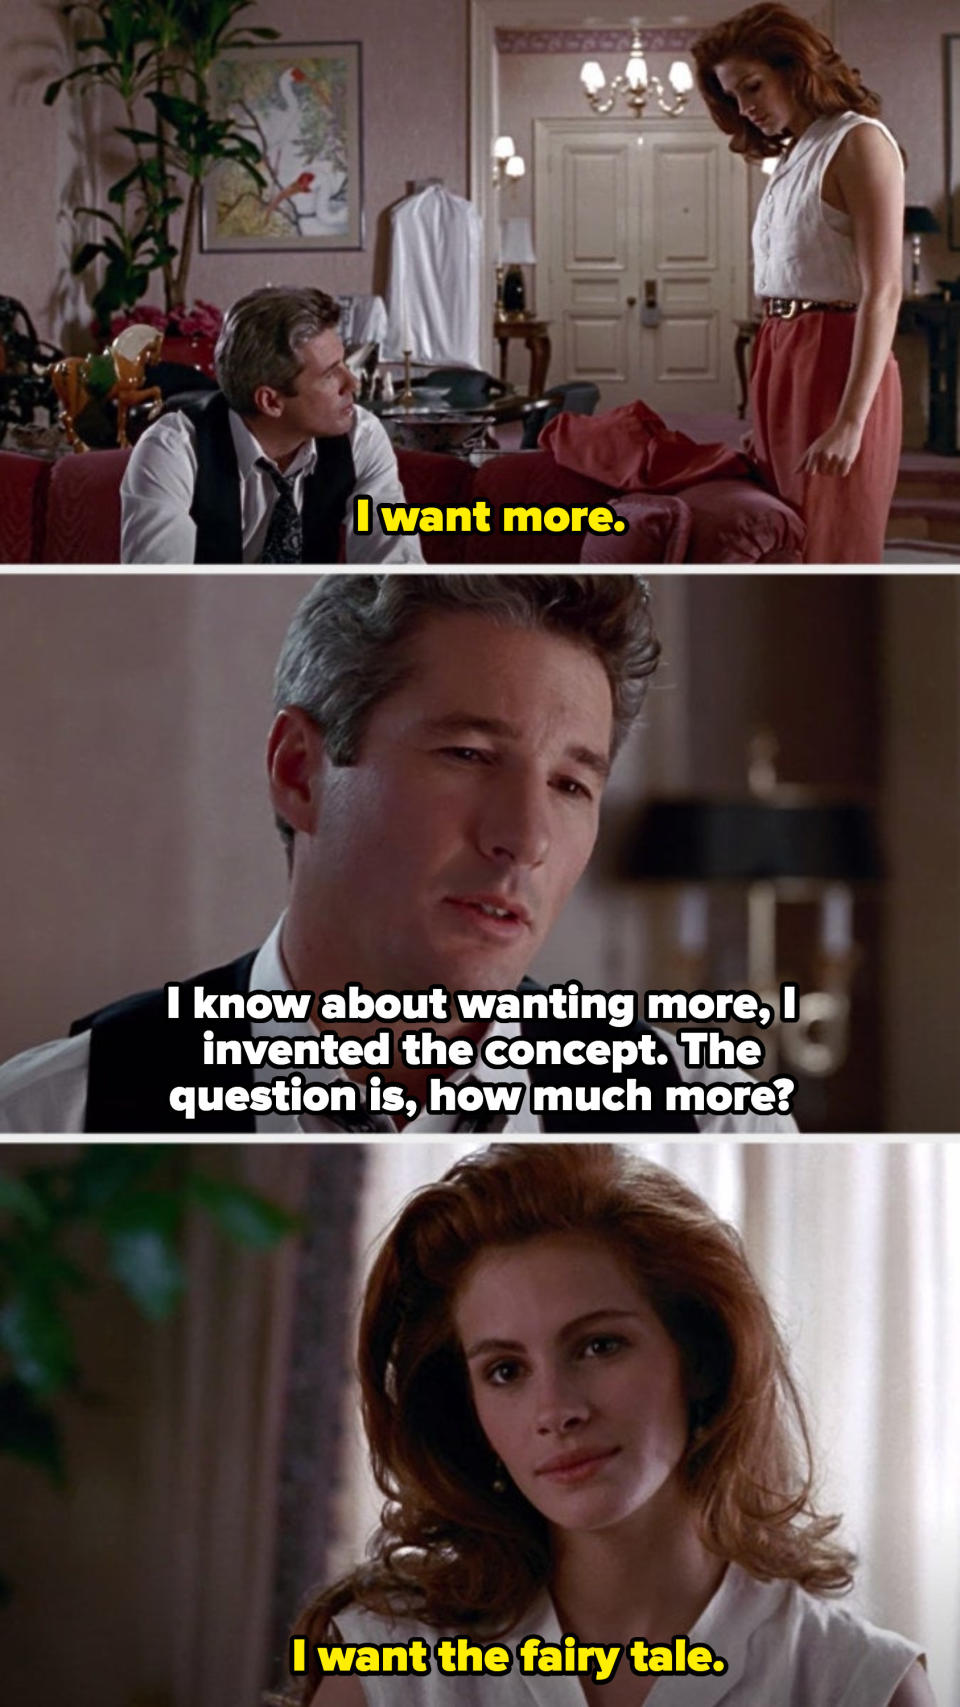 Julia Roberts in "Pretty Woman" saying: "I want more. I want the fairy tale"